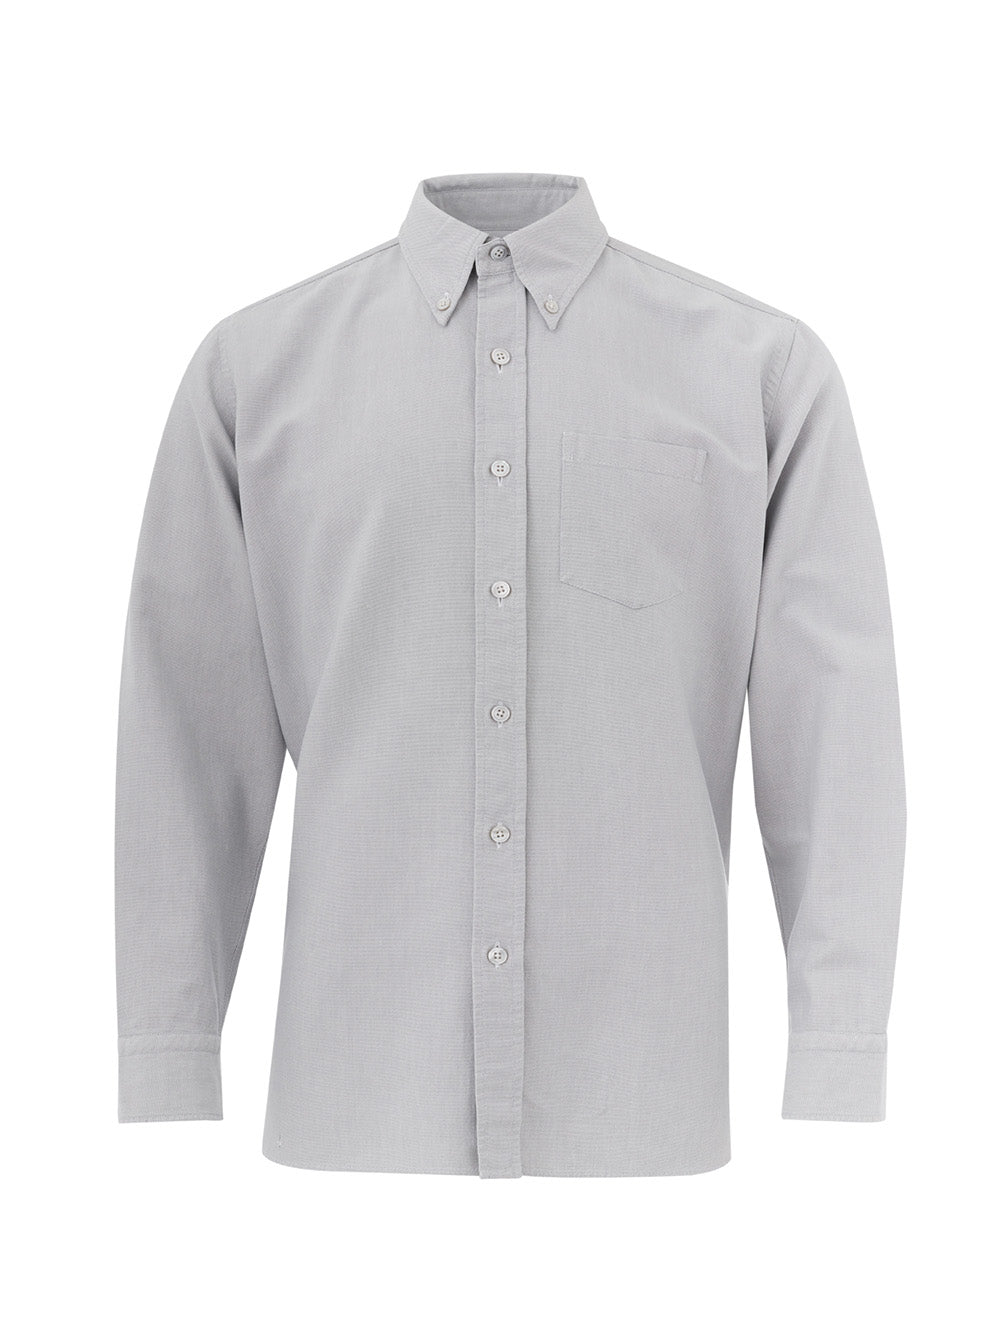 Tom Ford shirt with pocket